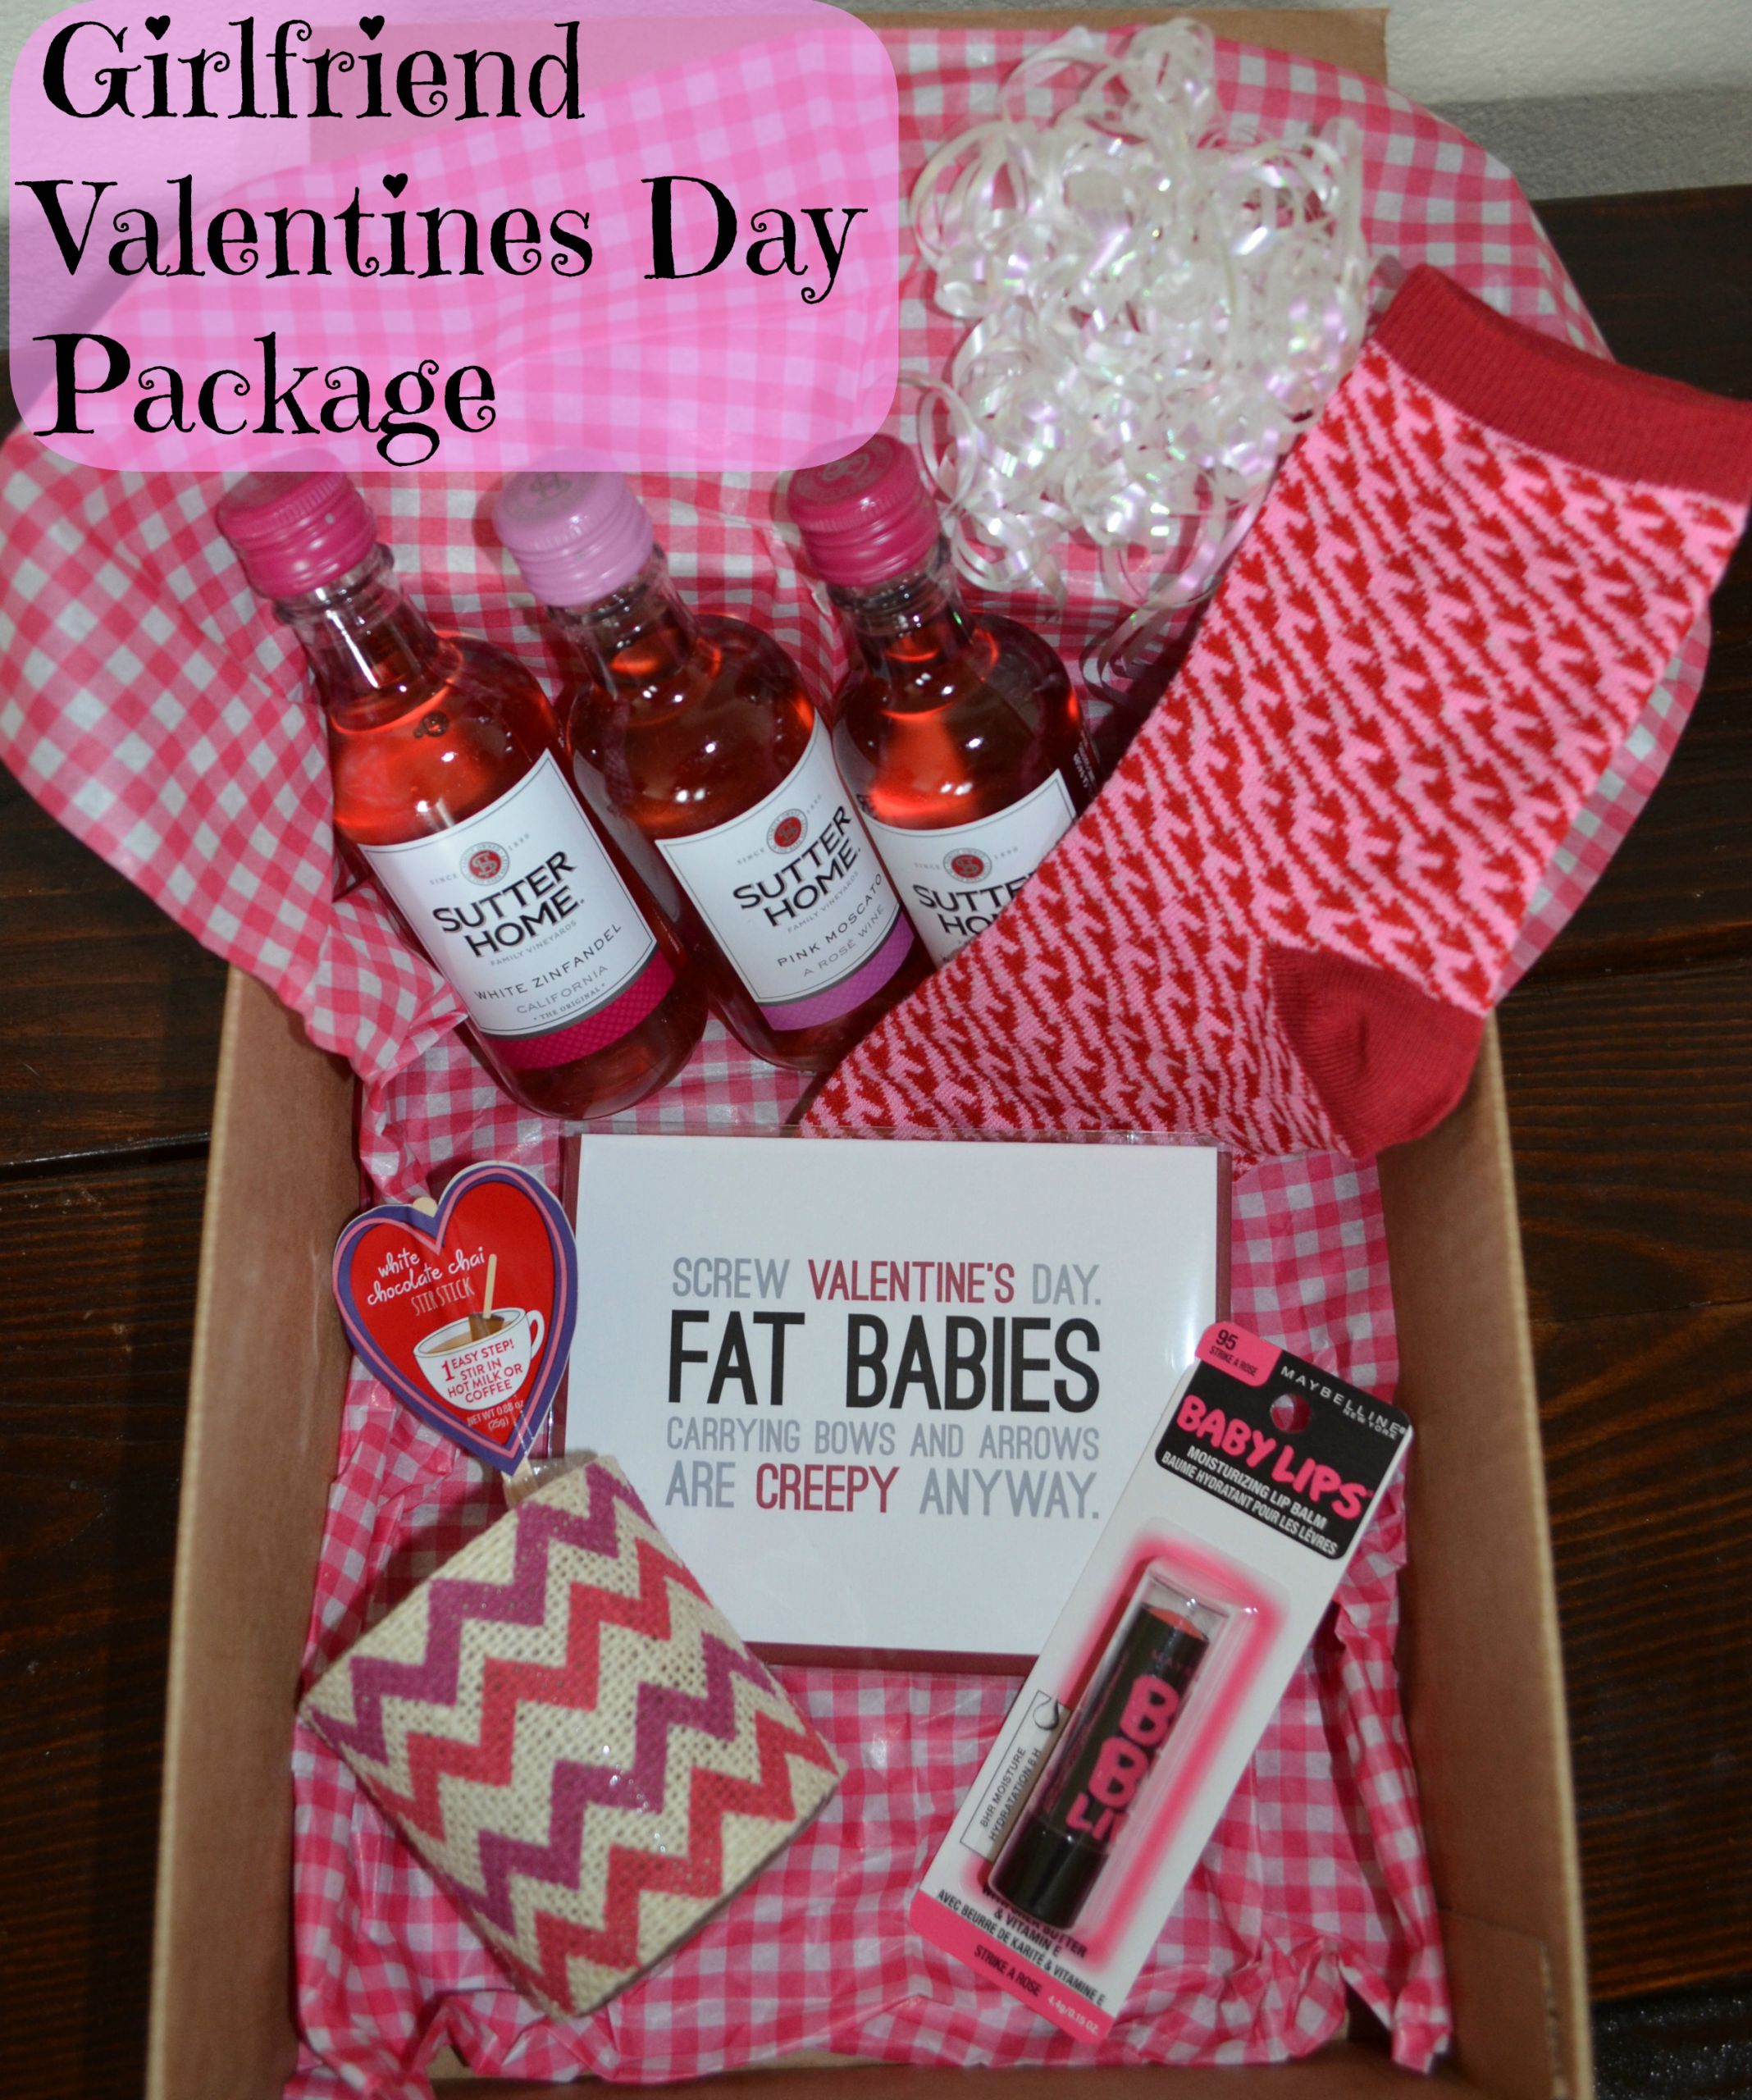 Valentine Gift Ideas For Women
 24 ADORABLE GIFT IDEAS FOR THE WOMEN IN YOUR LIFE